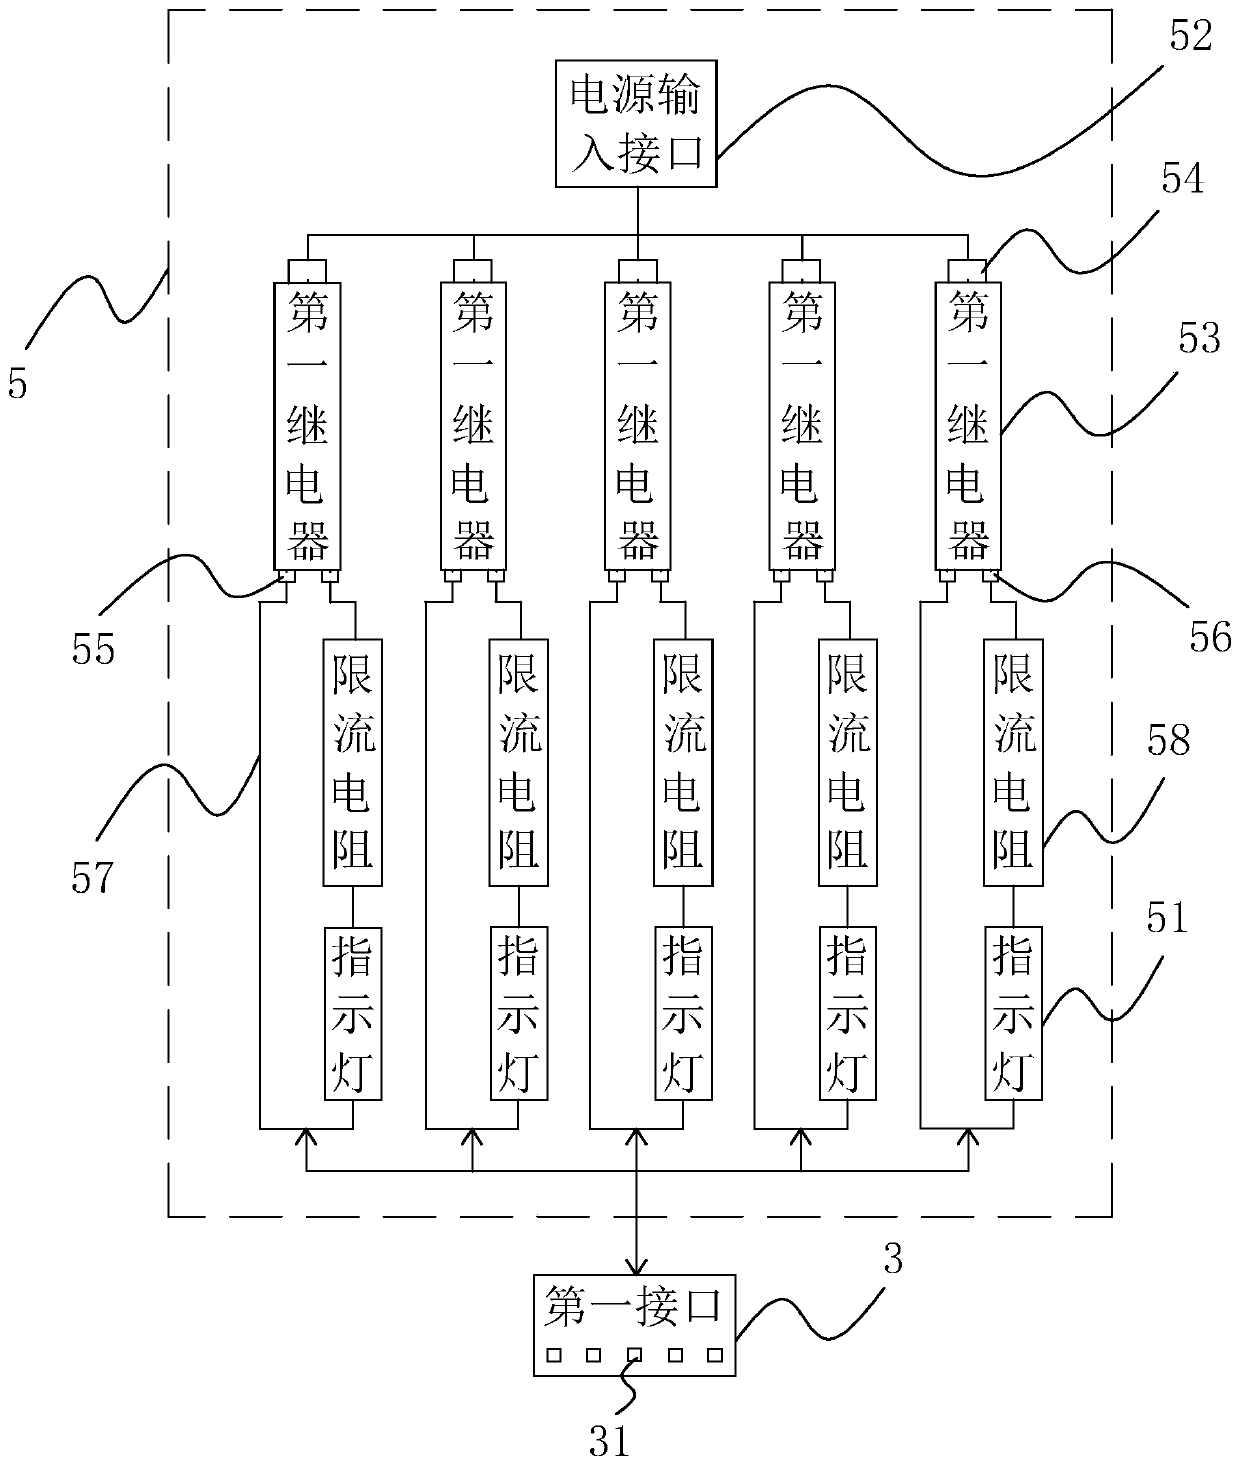 A USB data line detection system and device